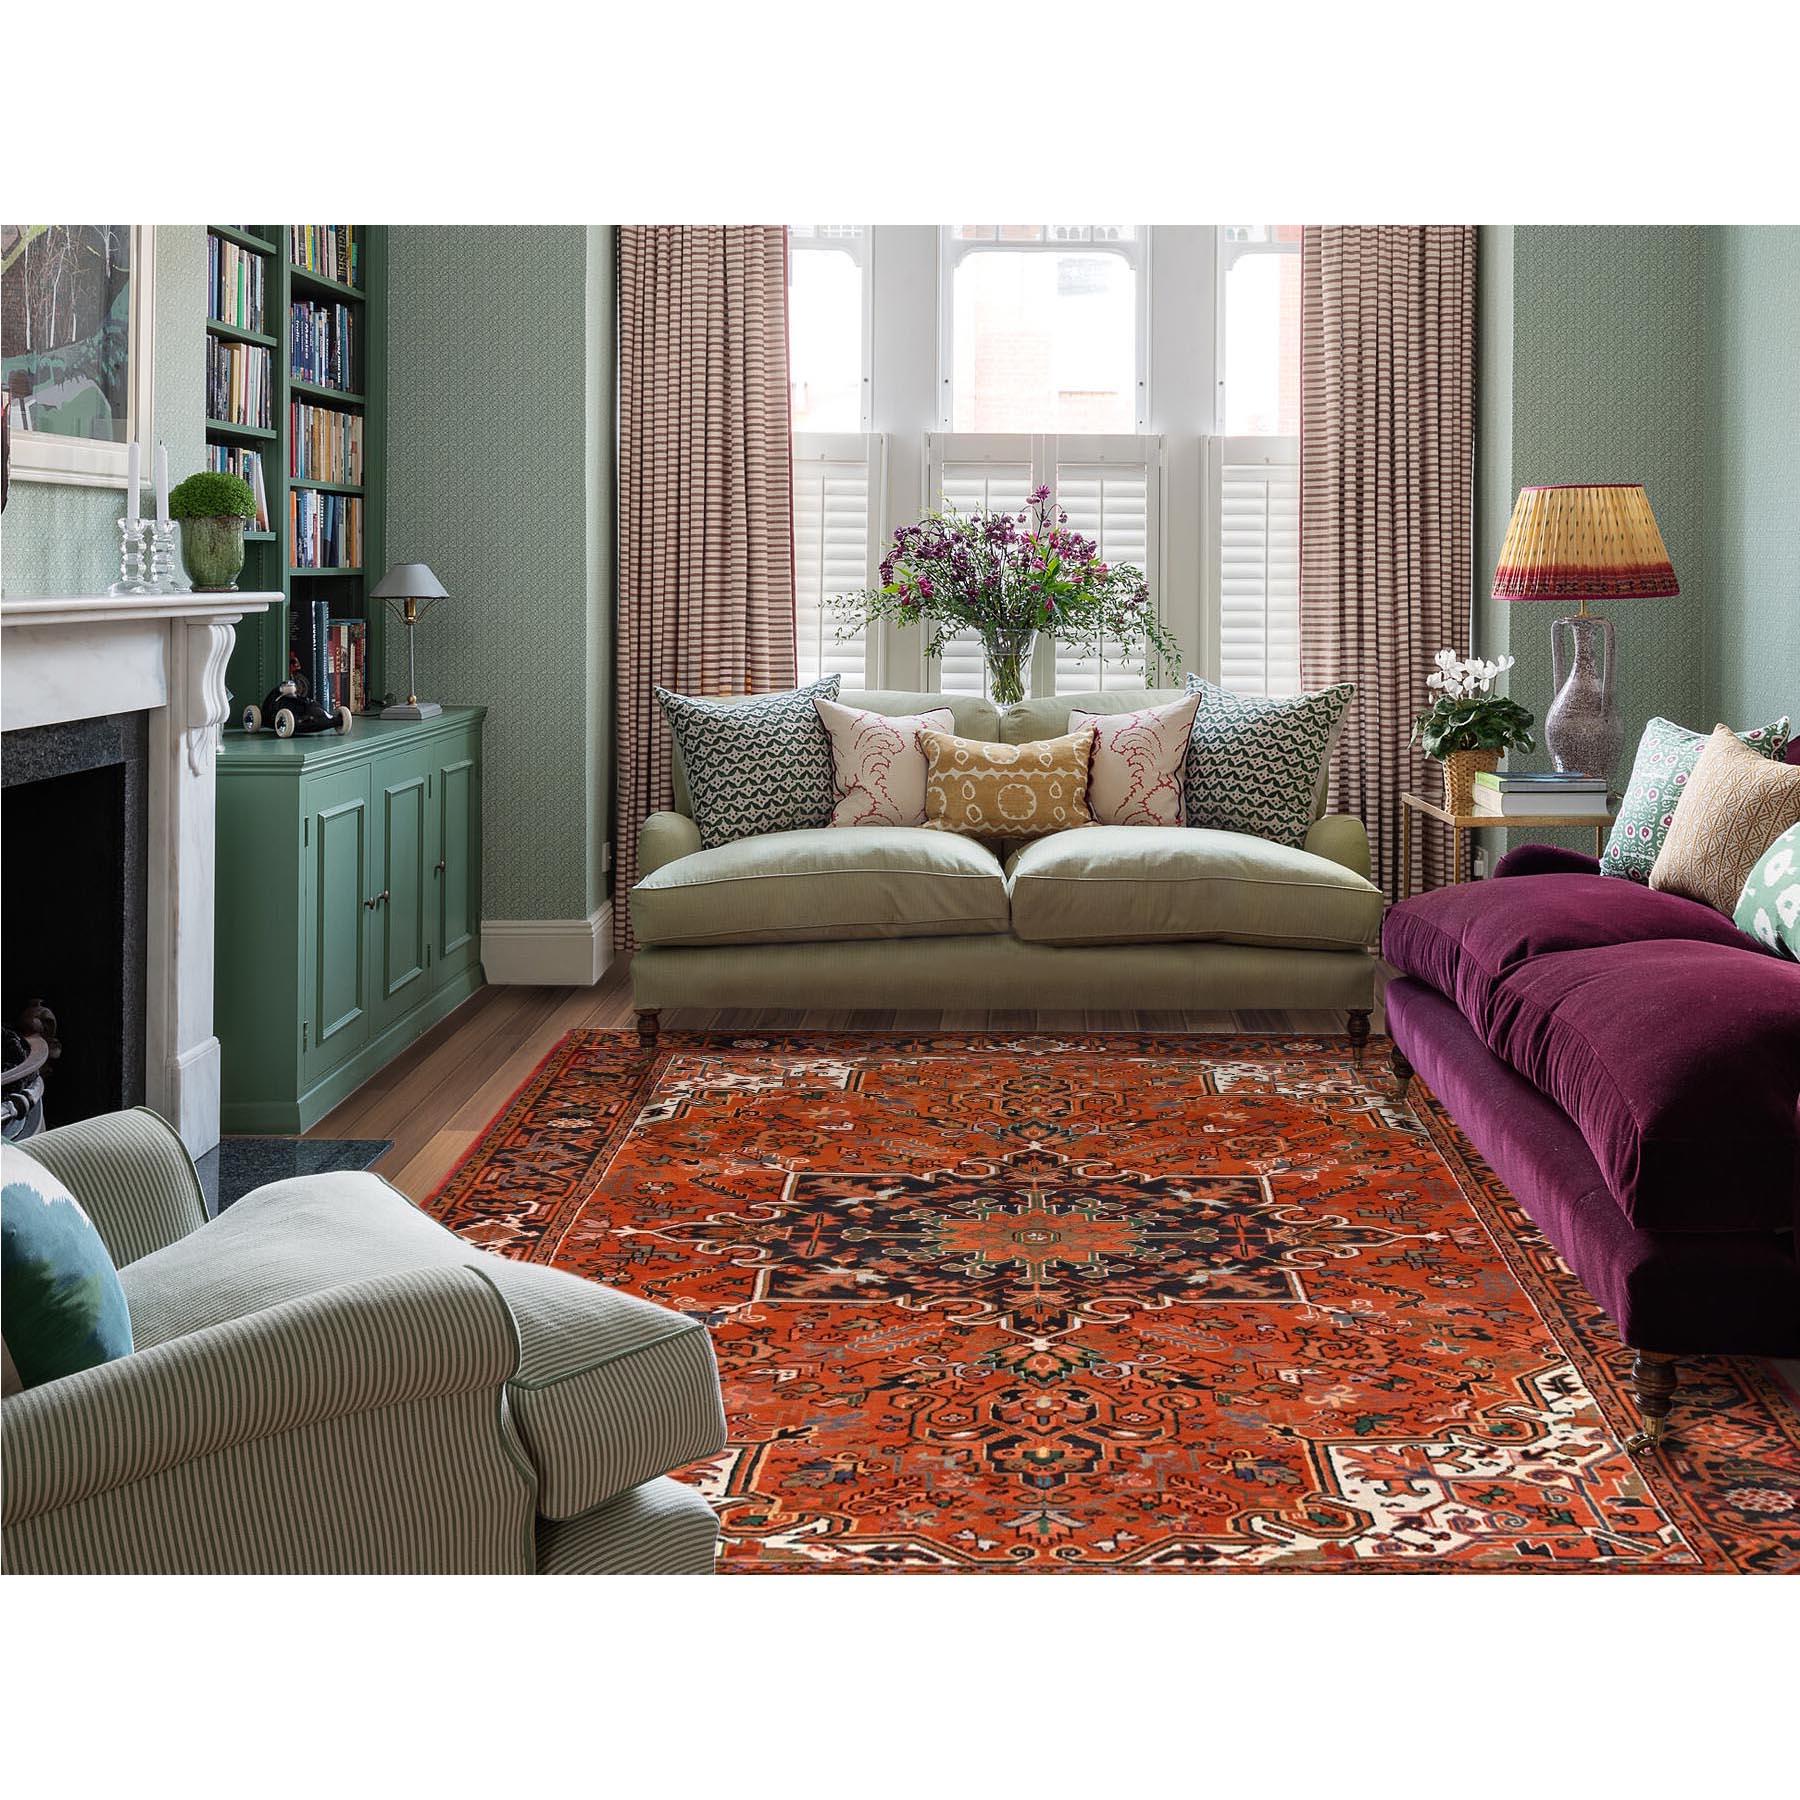 This fabulous Hand-Knotted carpet has been created and designed for extra strength and durability. This rug has been handcrafted for weeks in the traditional method that is used to make
Exact Rug Size in Feet and Inches : 8'1